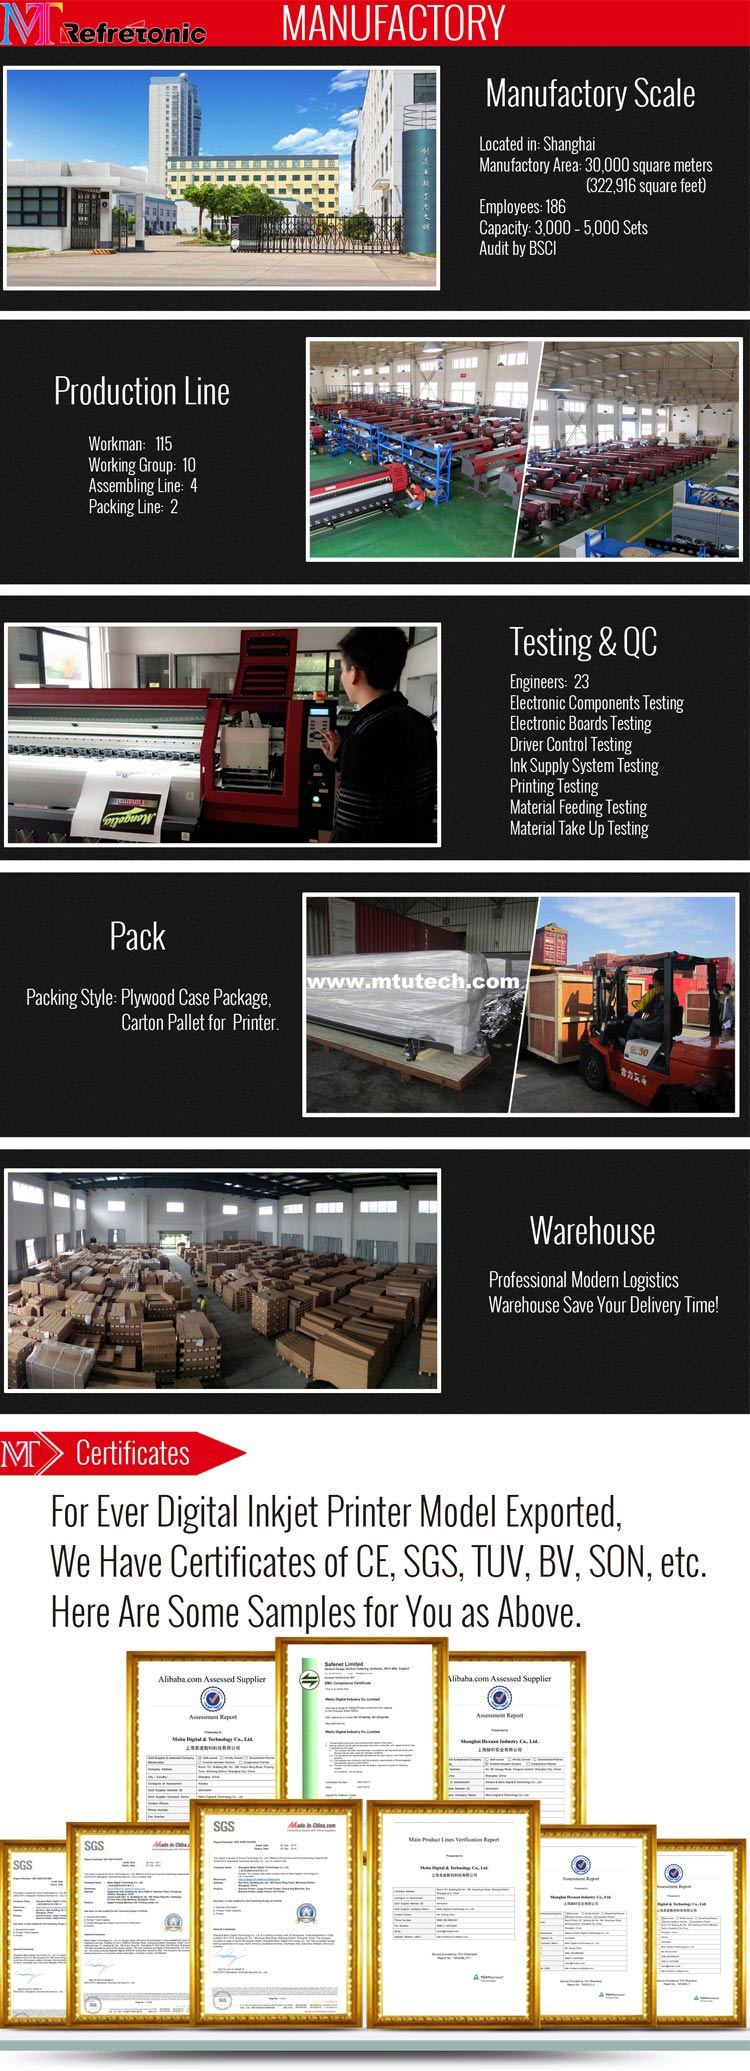 China Newest Wide Format UV Flatbed Printer Mt-UV2000 for Aluminum